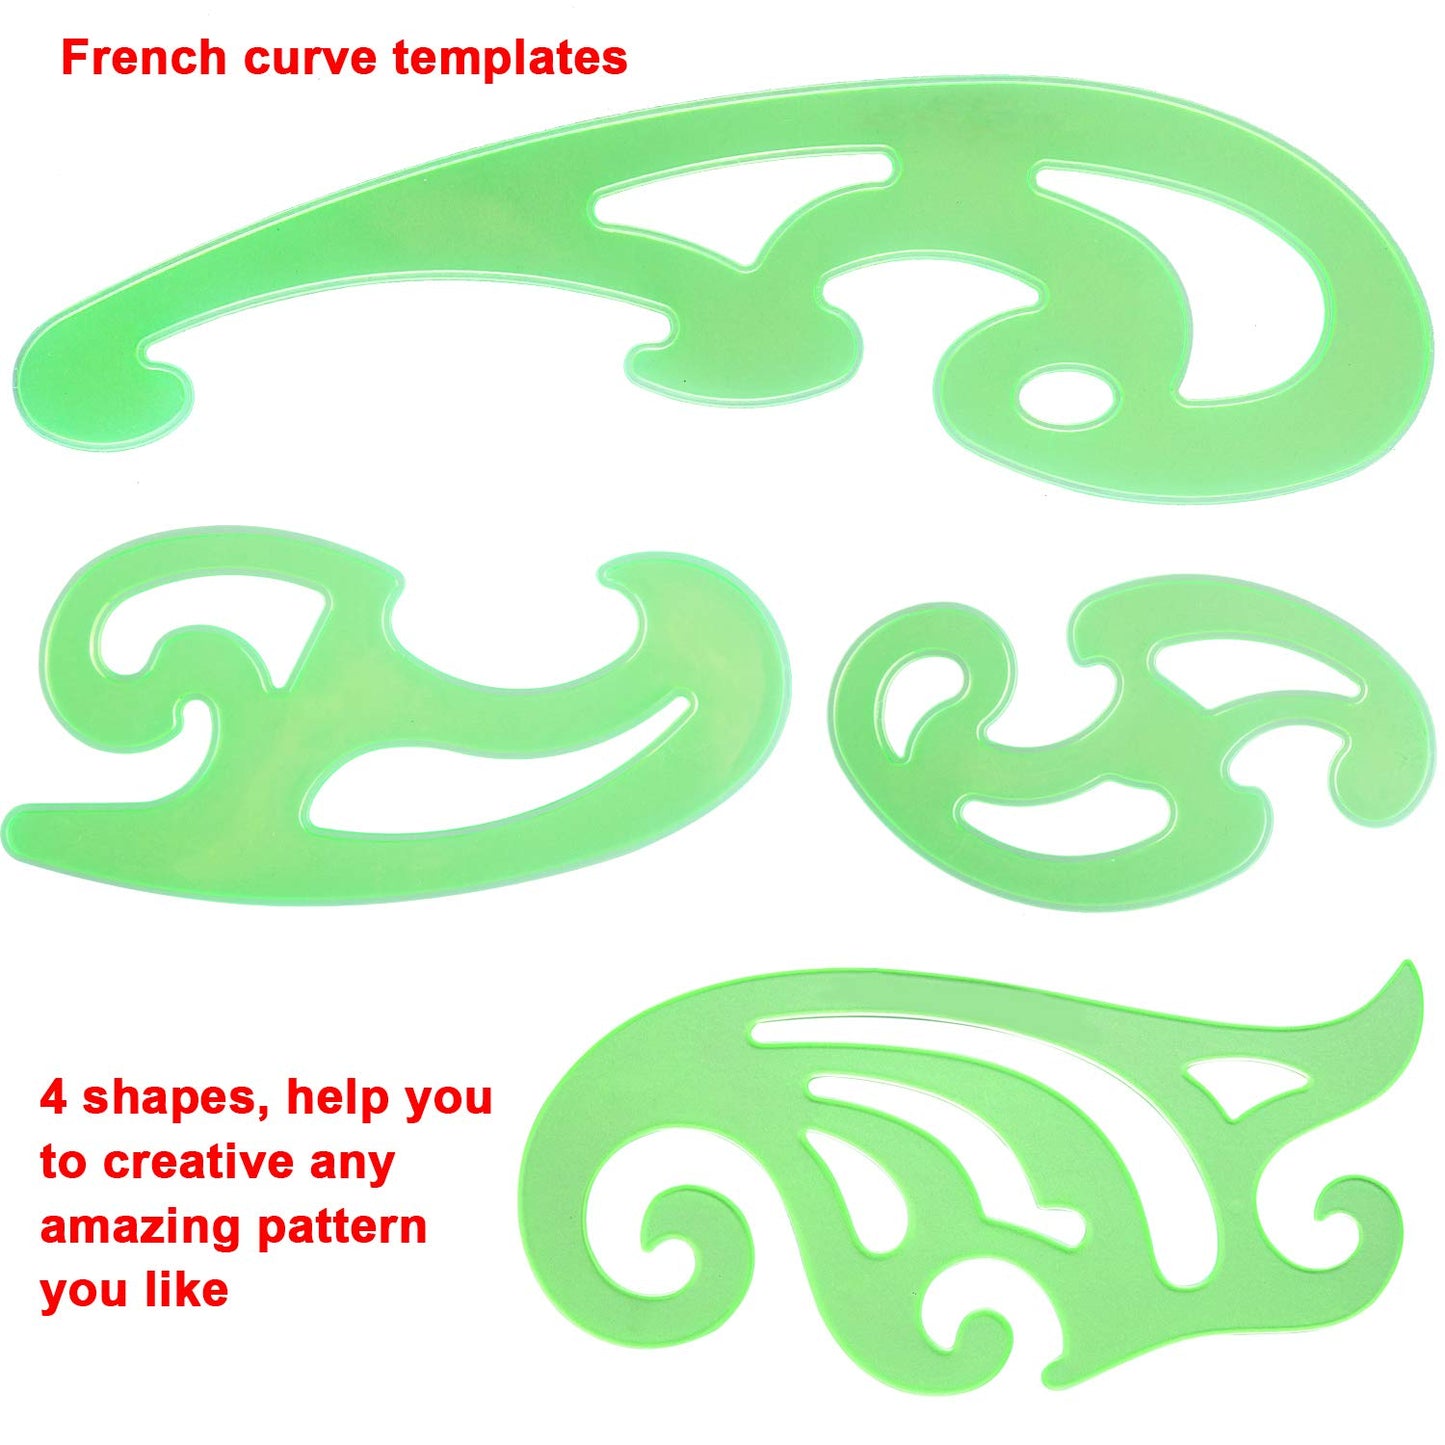 SIQUK 9 Pieces Drawings Templates French Curve Geometric Templates Measuring Rulers Clear Green Plastic Rulers for Engineering, Studying and